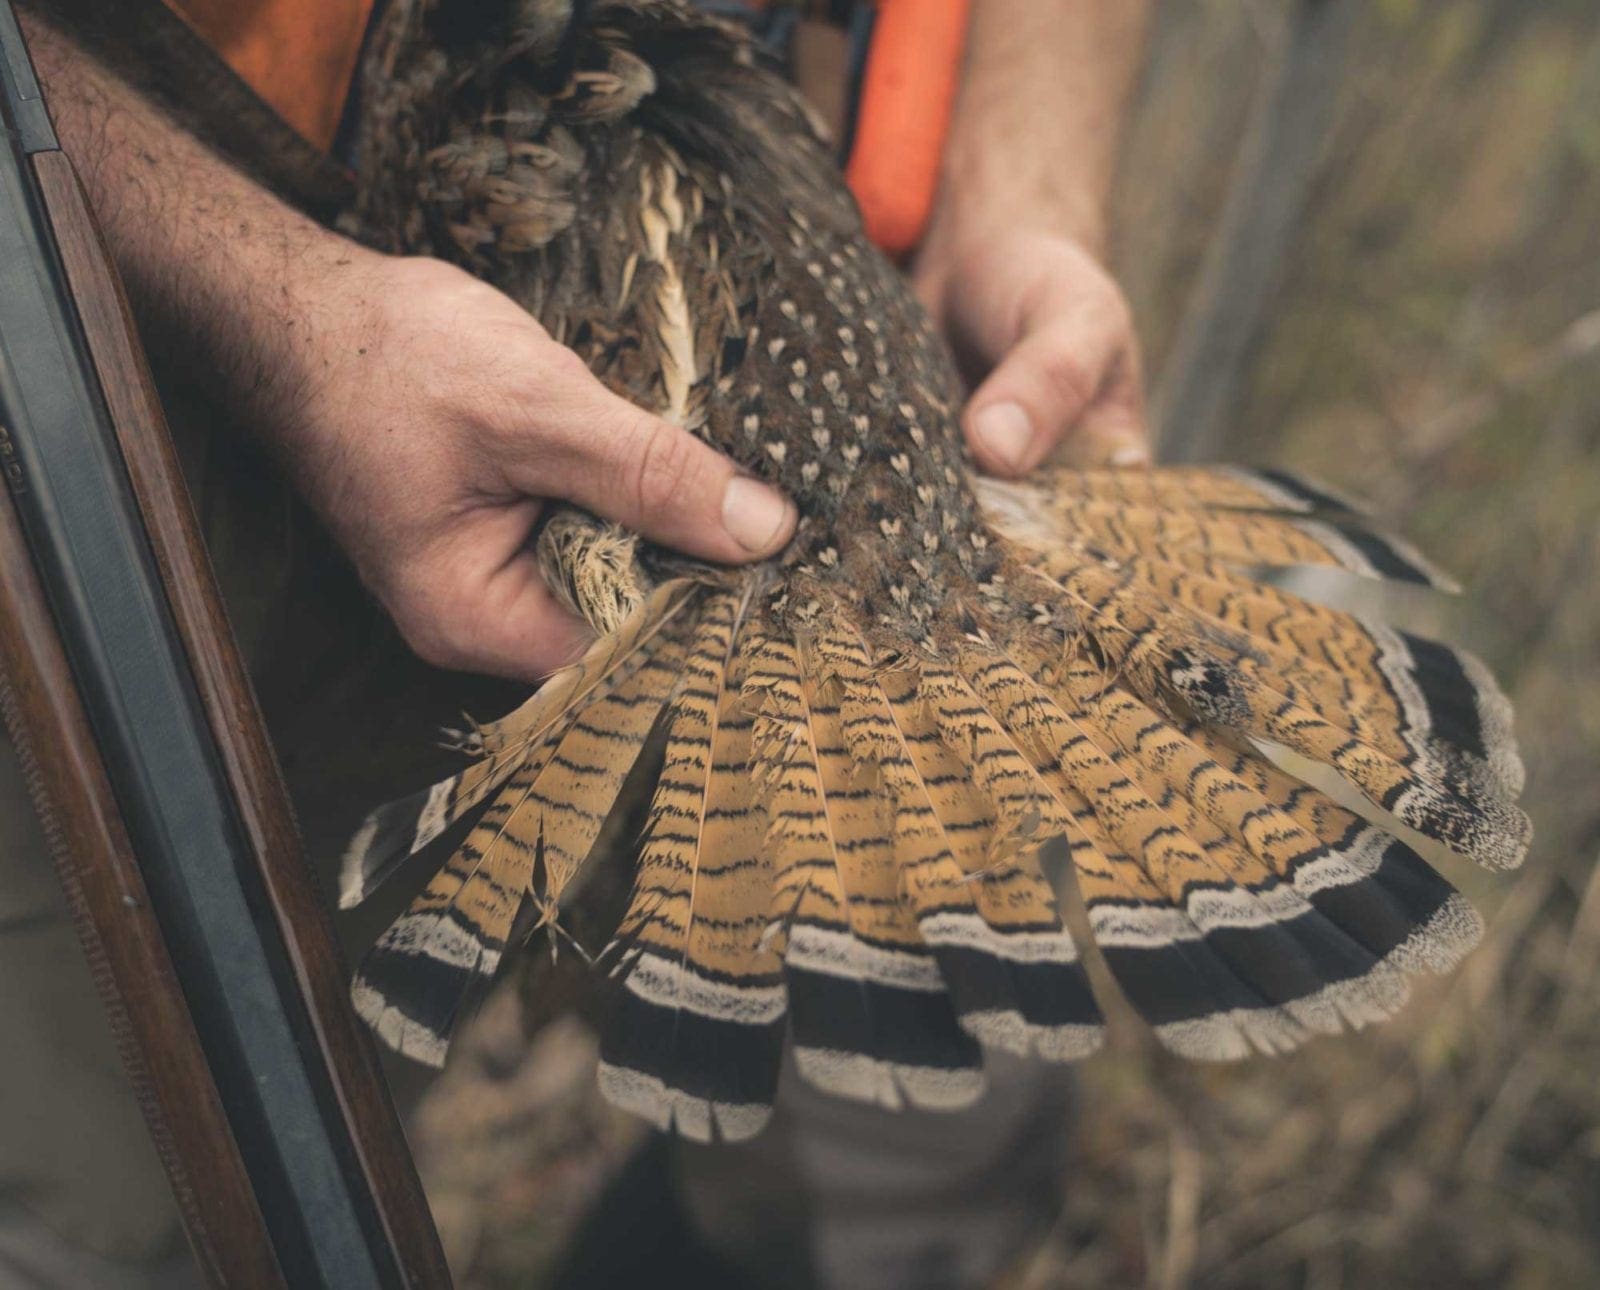 A grouse hunter holds a ruffed grouse fan open during a hunt.